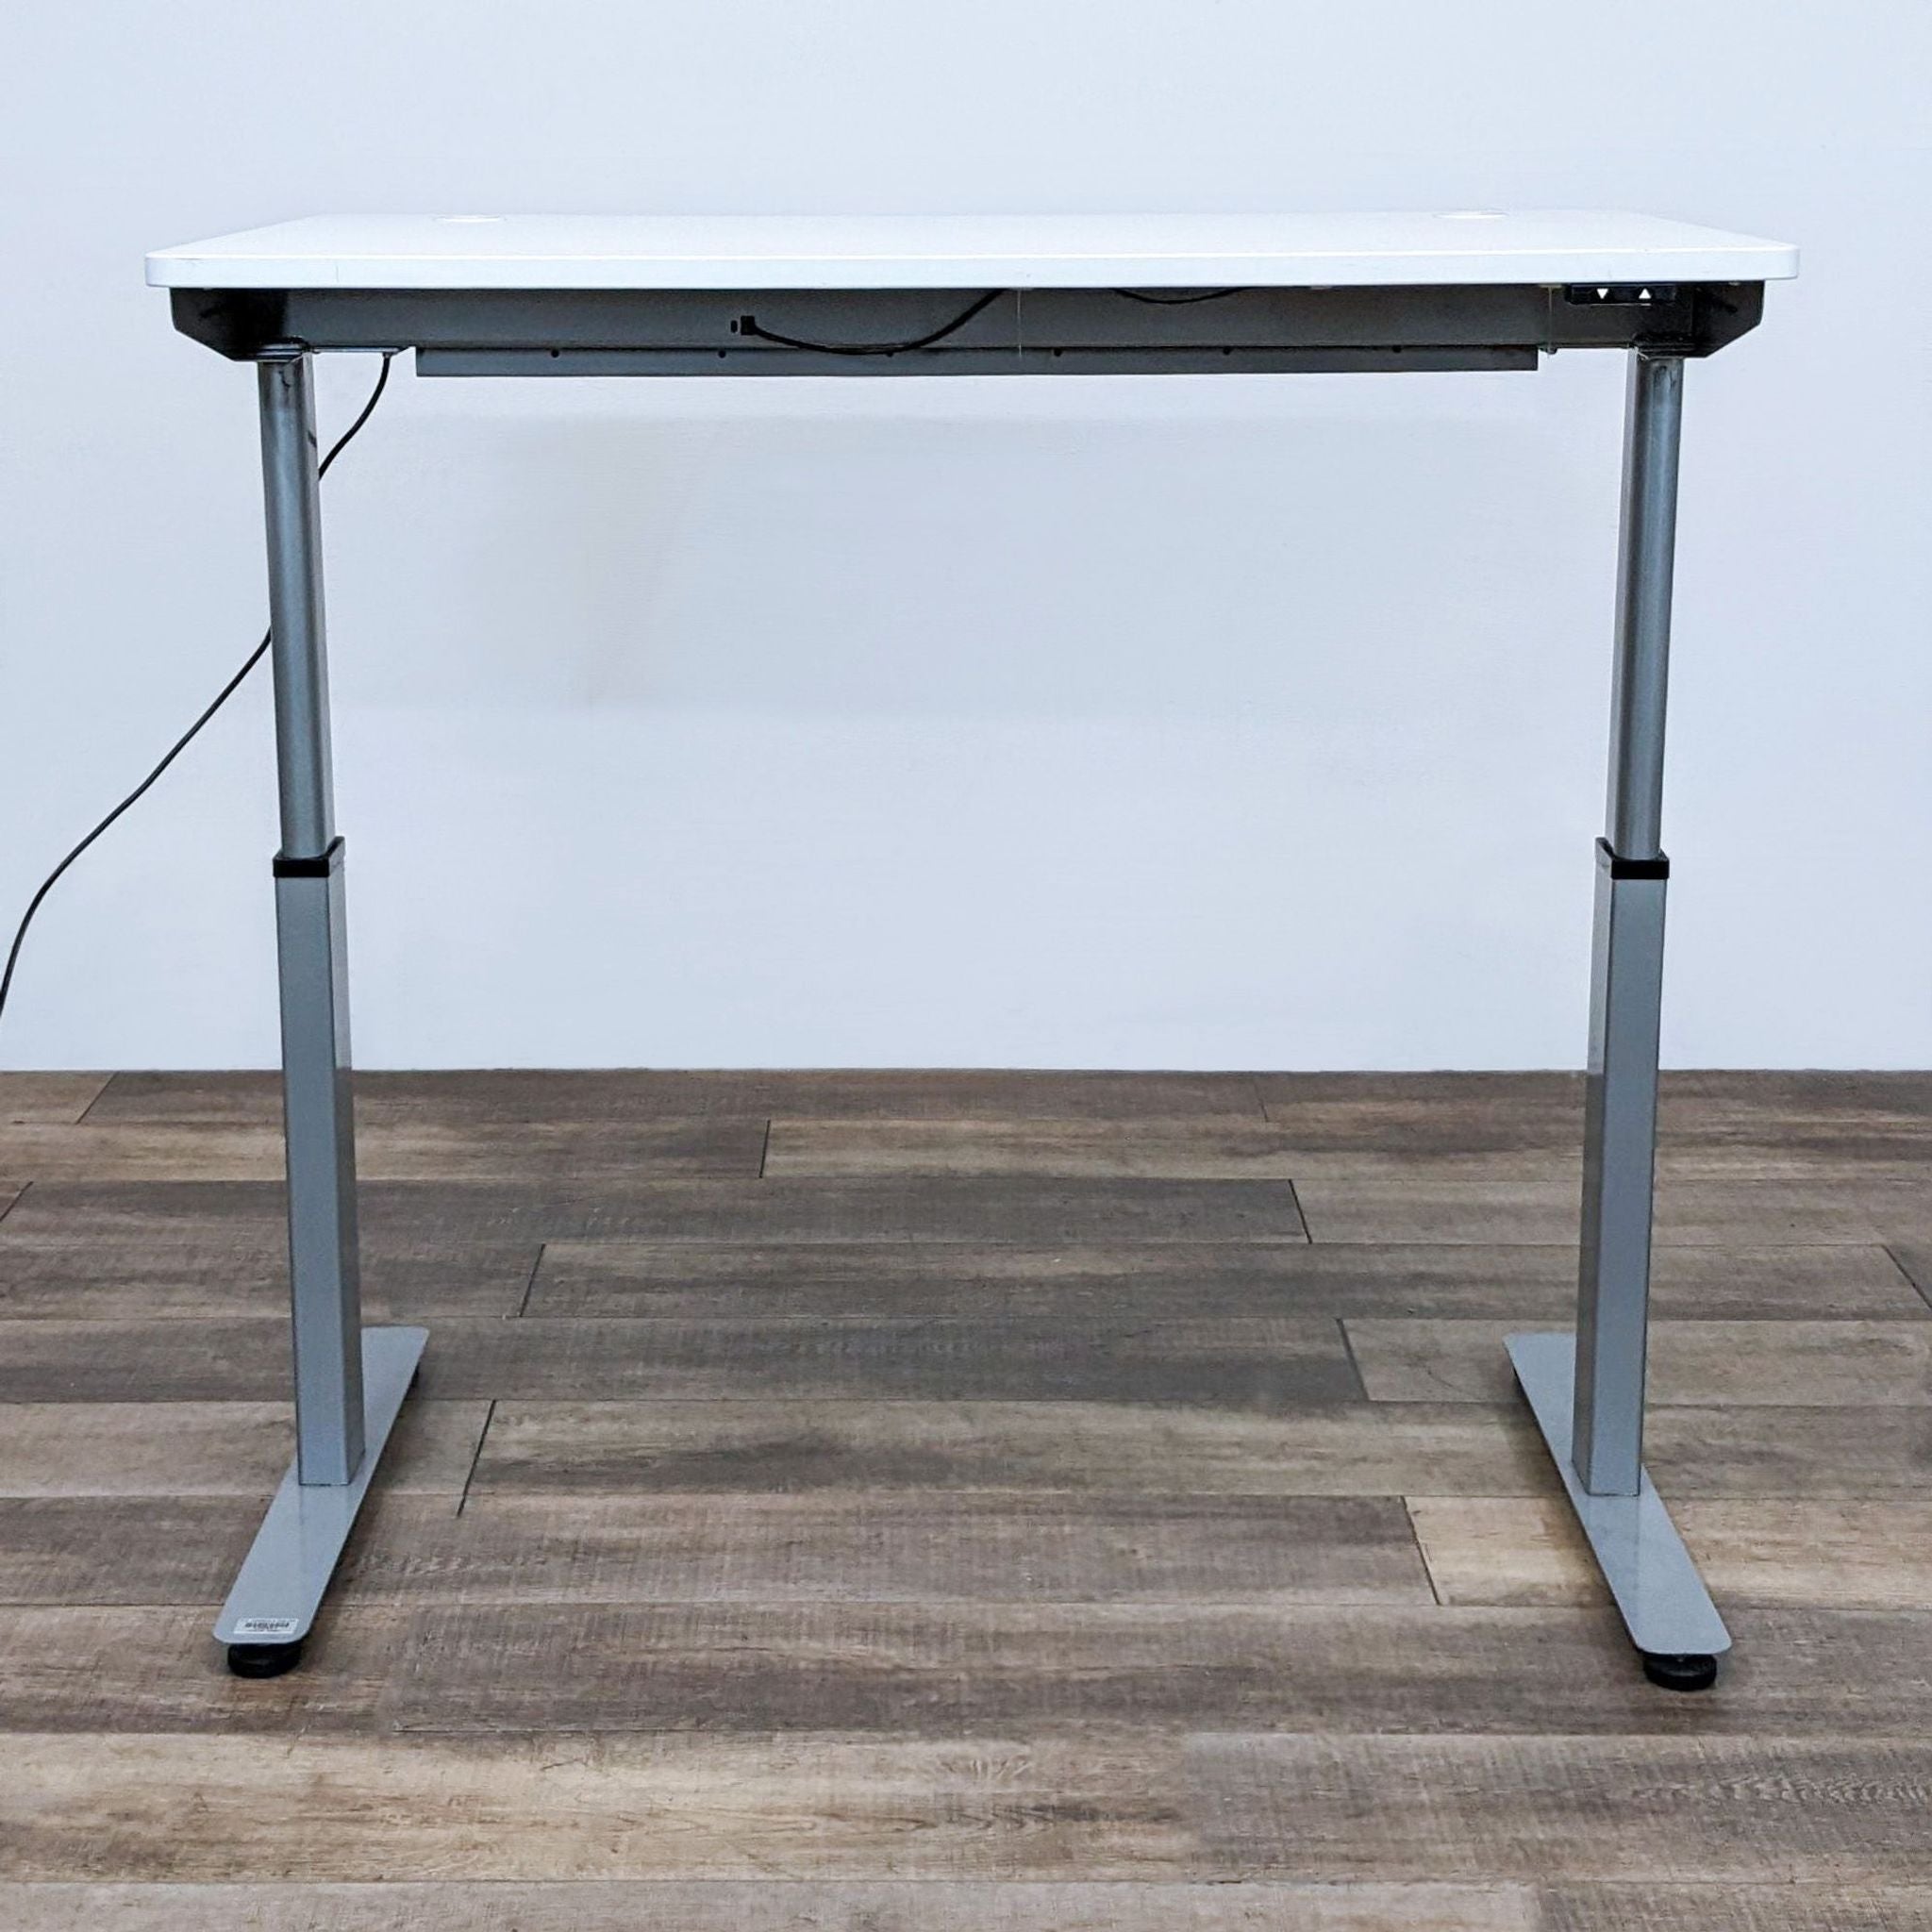 Alt text 2: The same Reperch motorized desk, now displayed at a higher level, showcasing its adjustable feature.